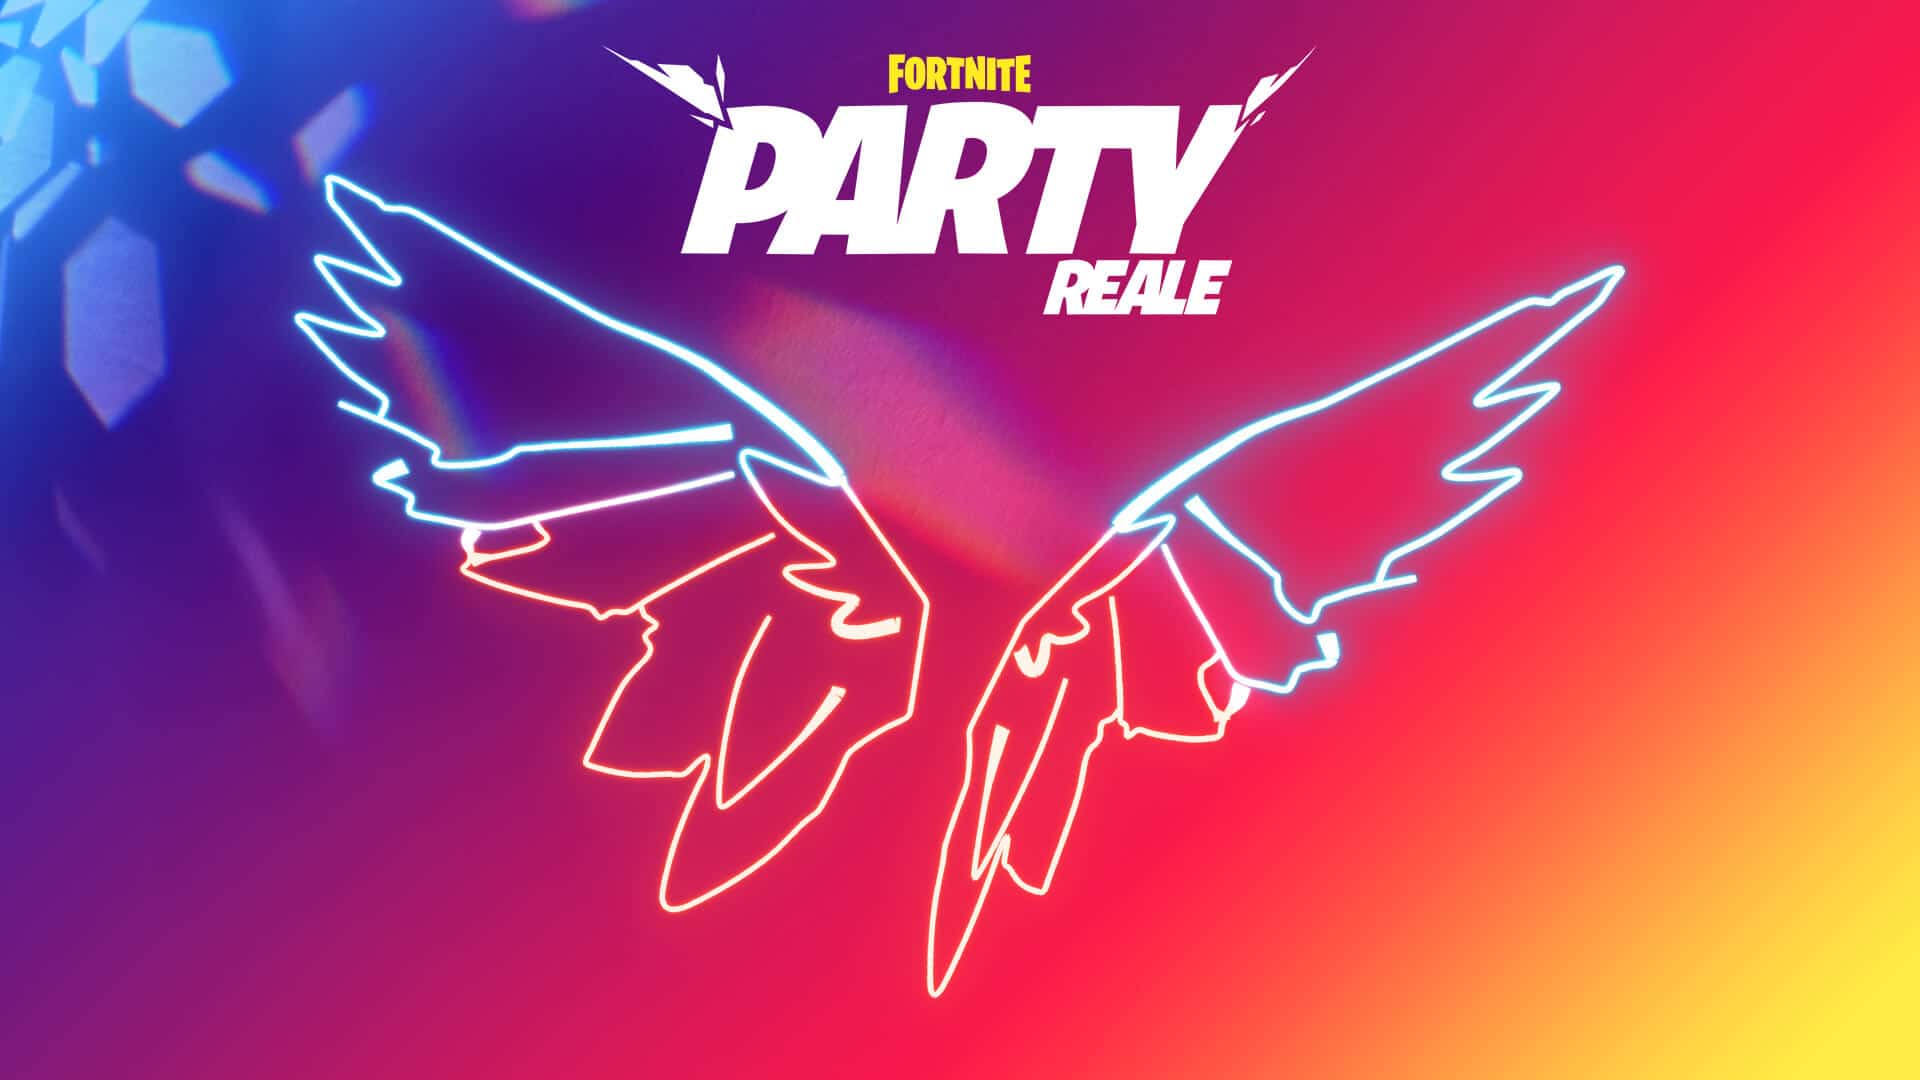 Fortnite party royale